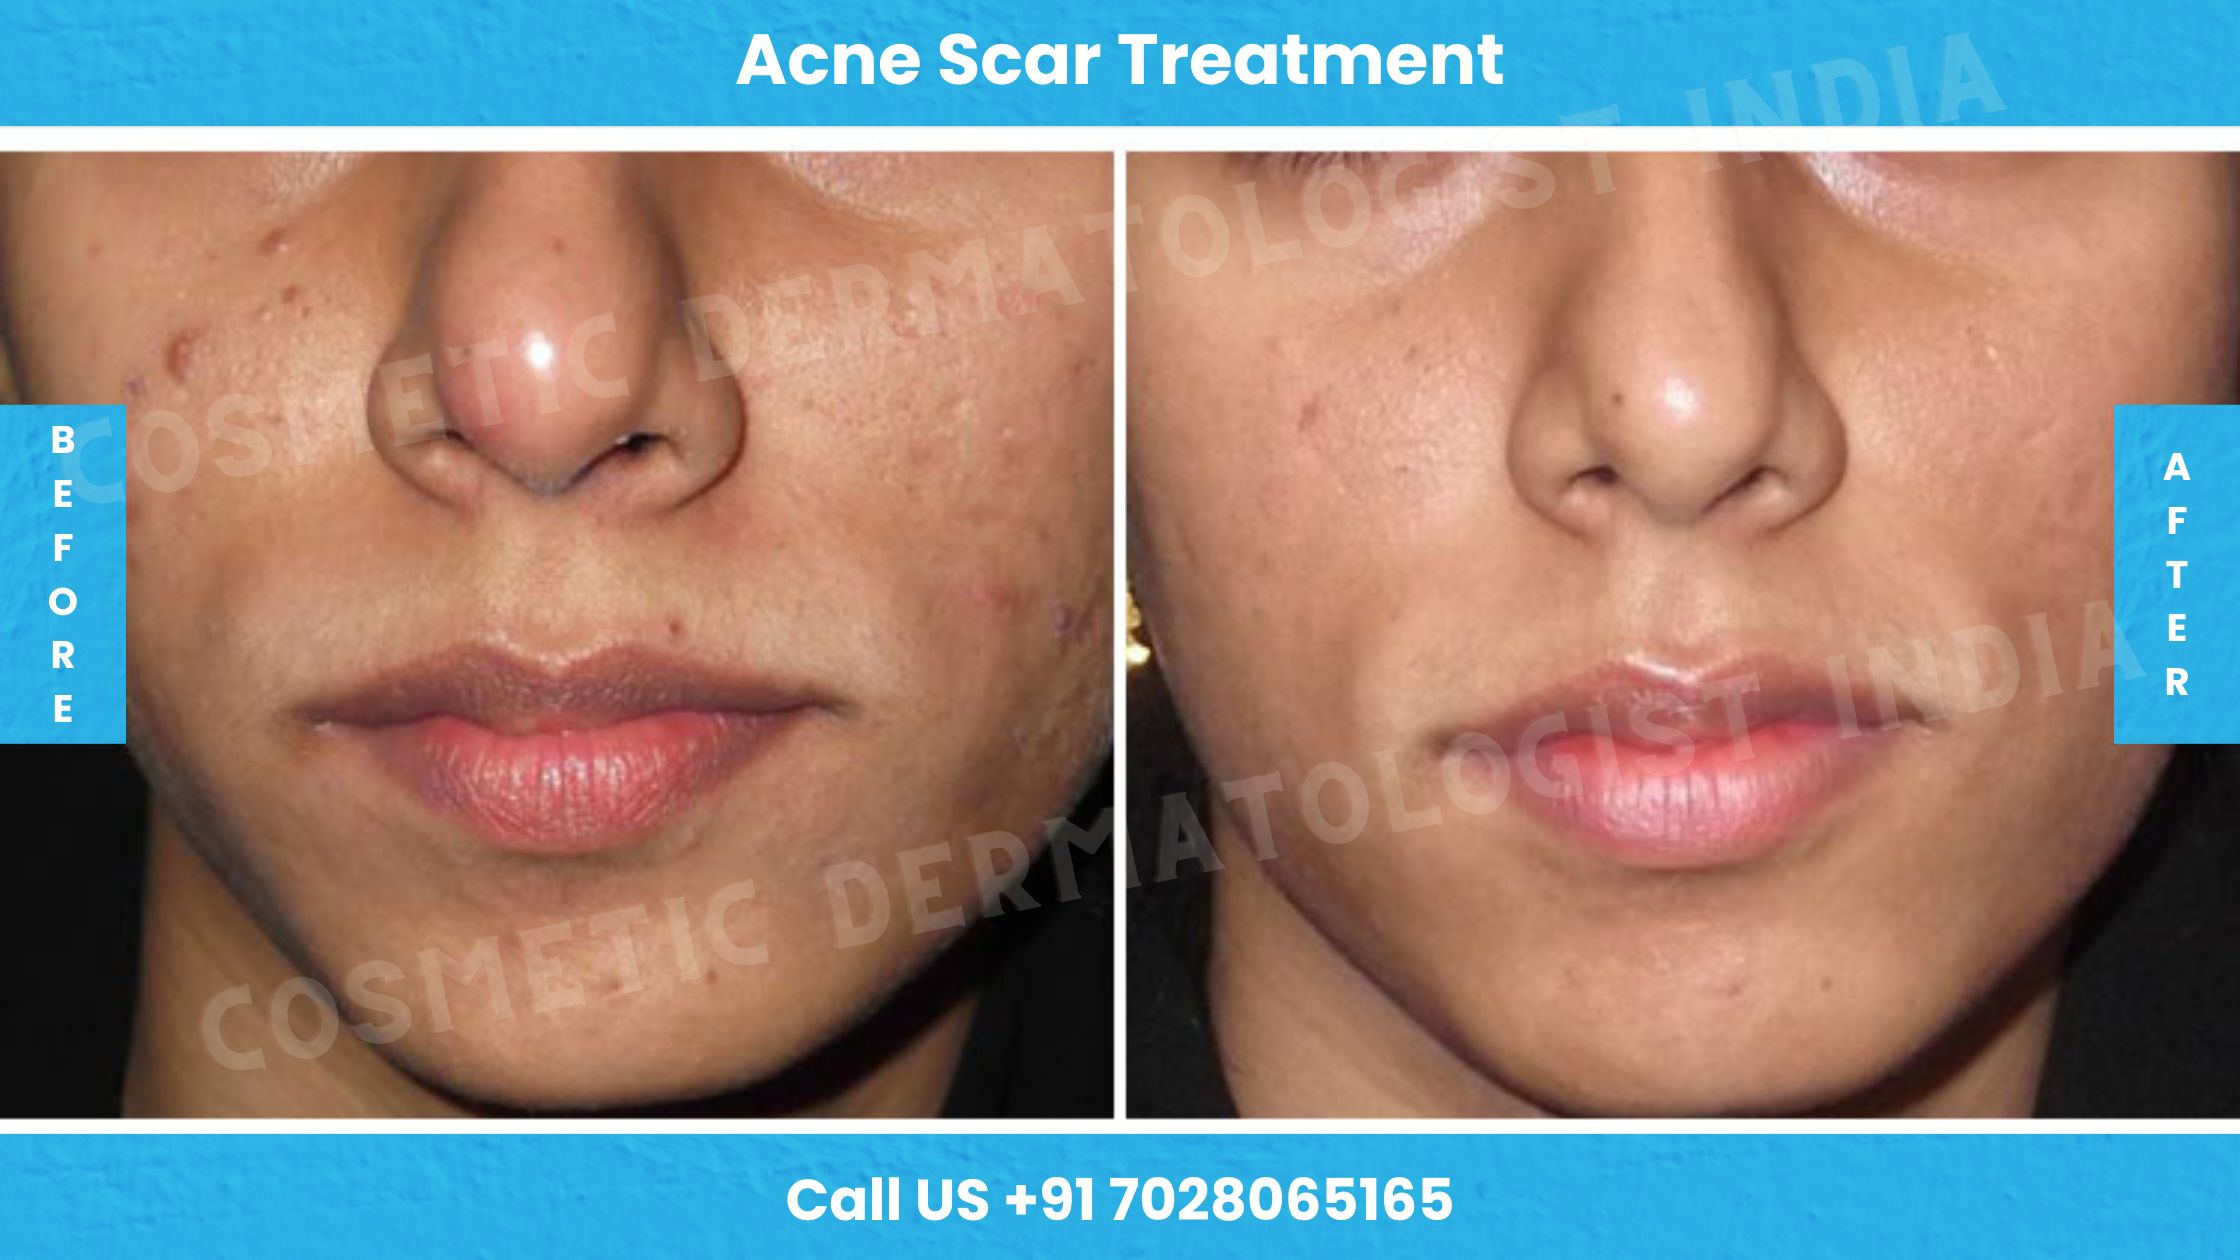 Before and after images of Acne Treatment